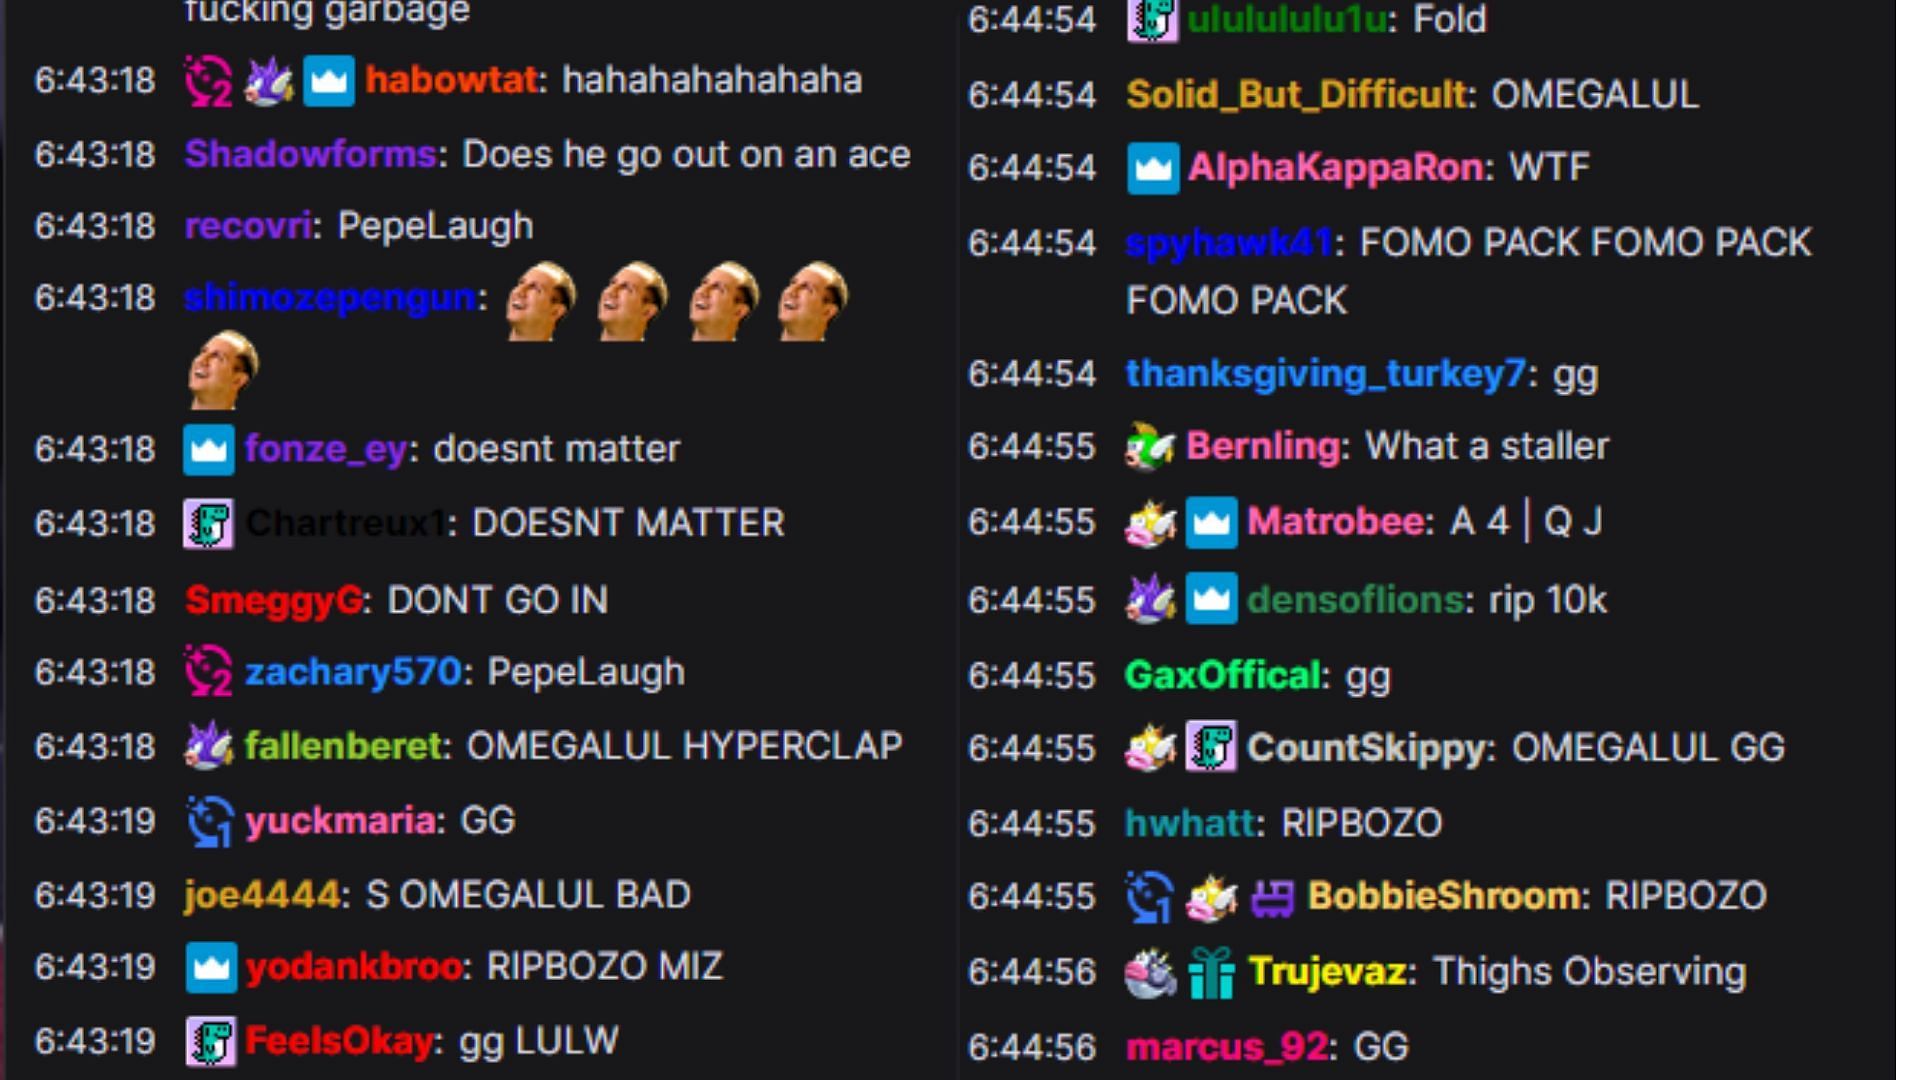 Live Twitch chat during the final hand (Image via mizkif/Twitch)